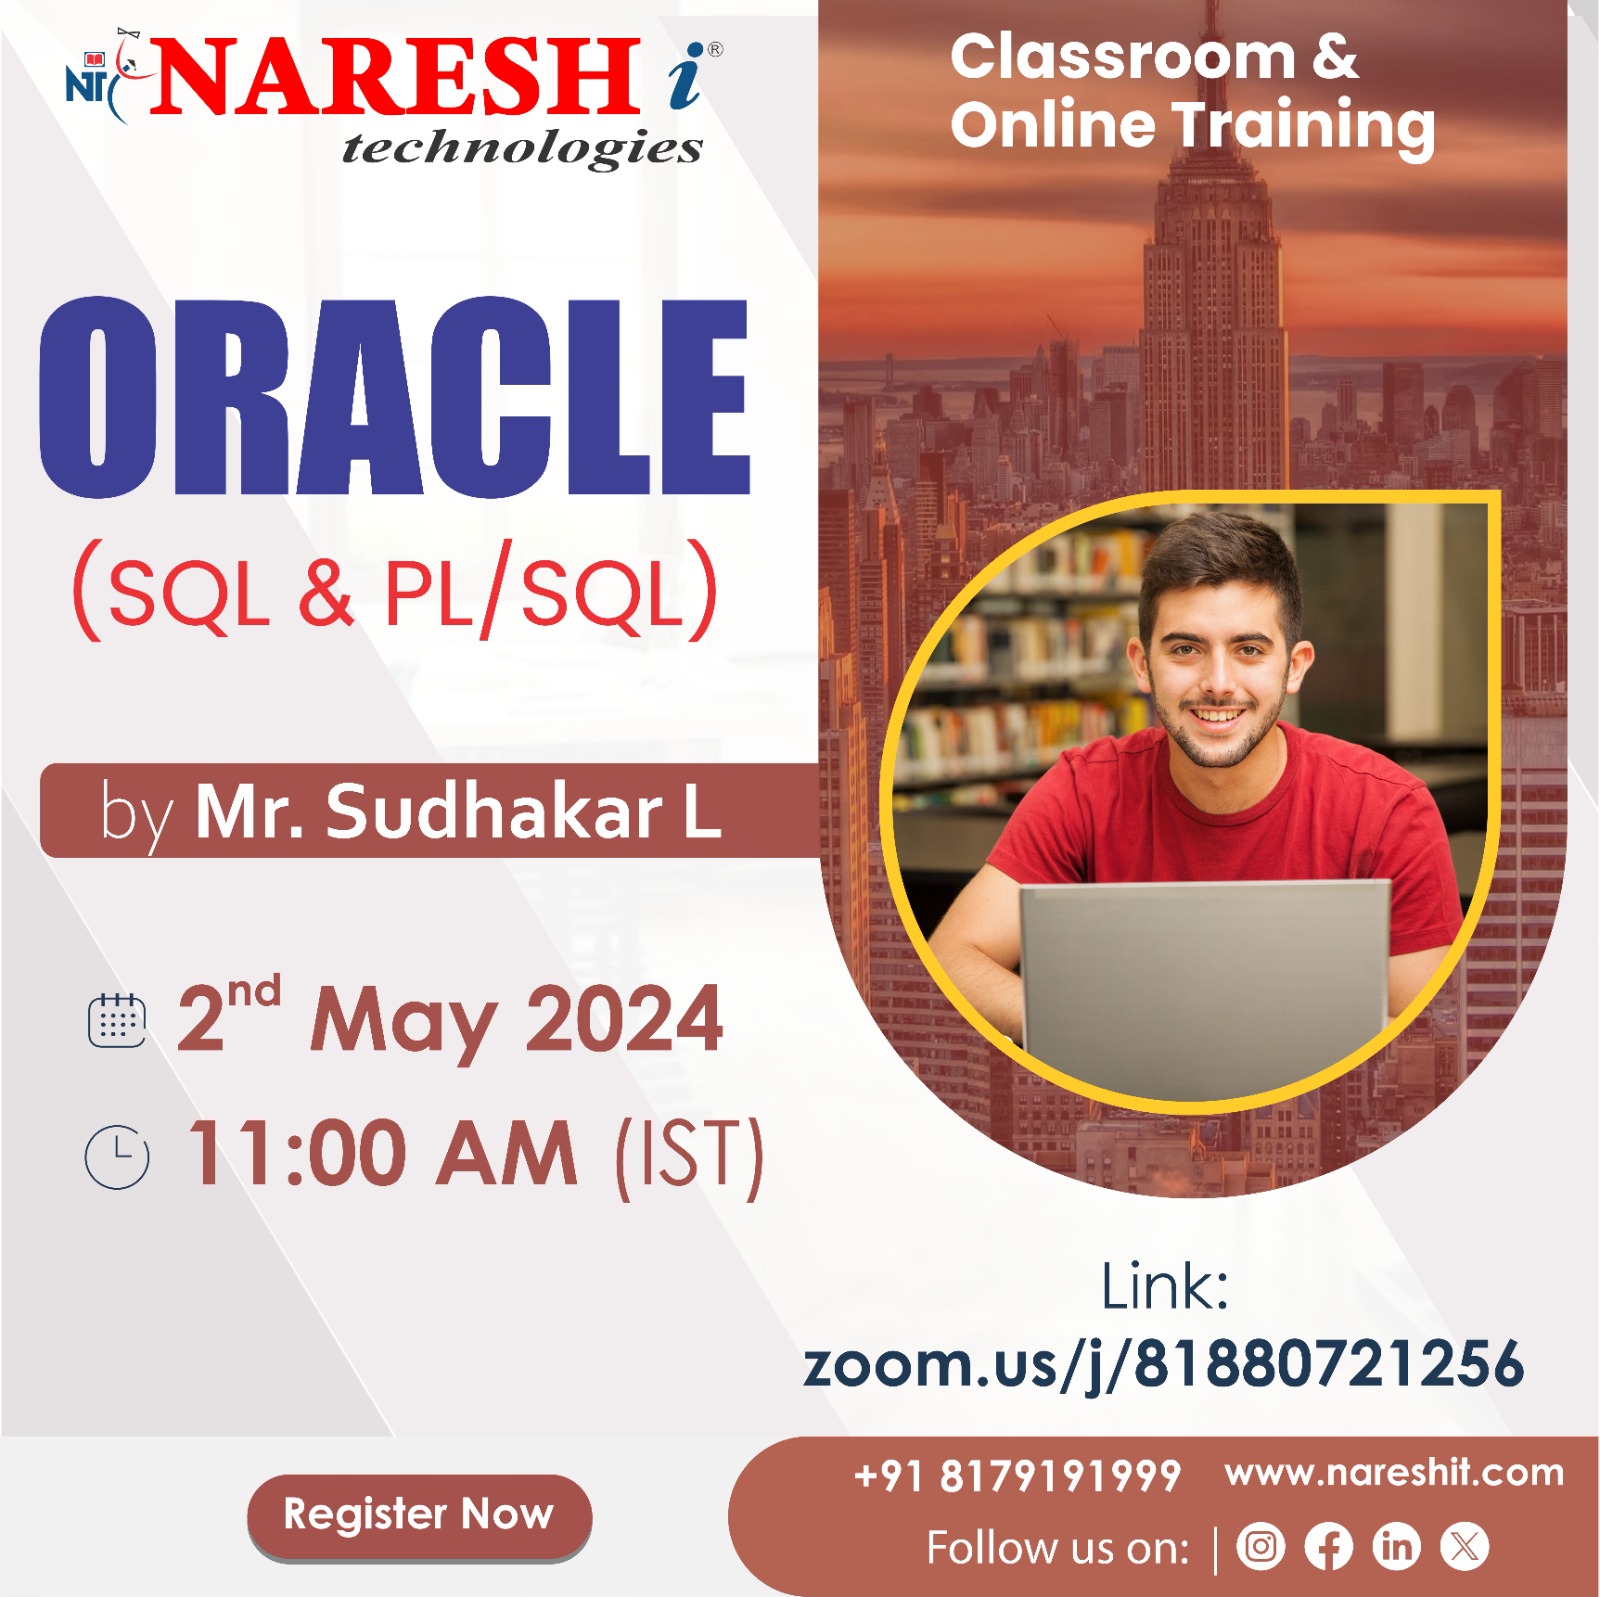 Best Oracle Classroom Training in KPHB - Naresh IT,Hyderabad,Educational & Institute,Free Classifieds,Post Free Ads,77traders.com